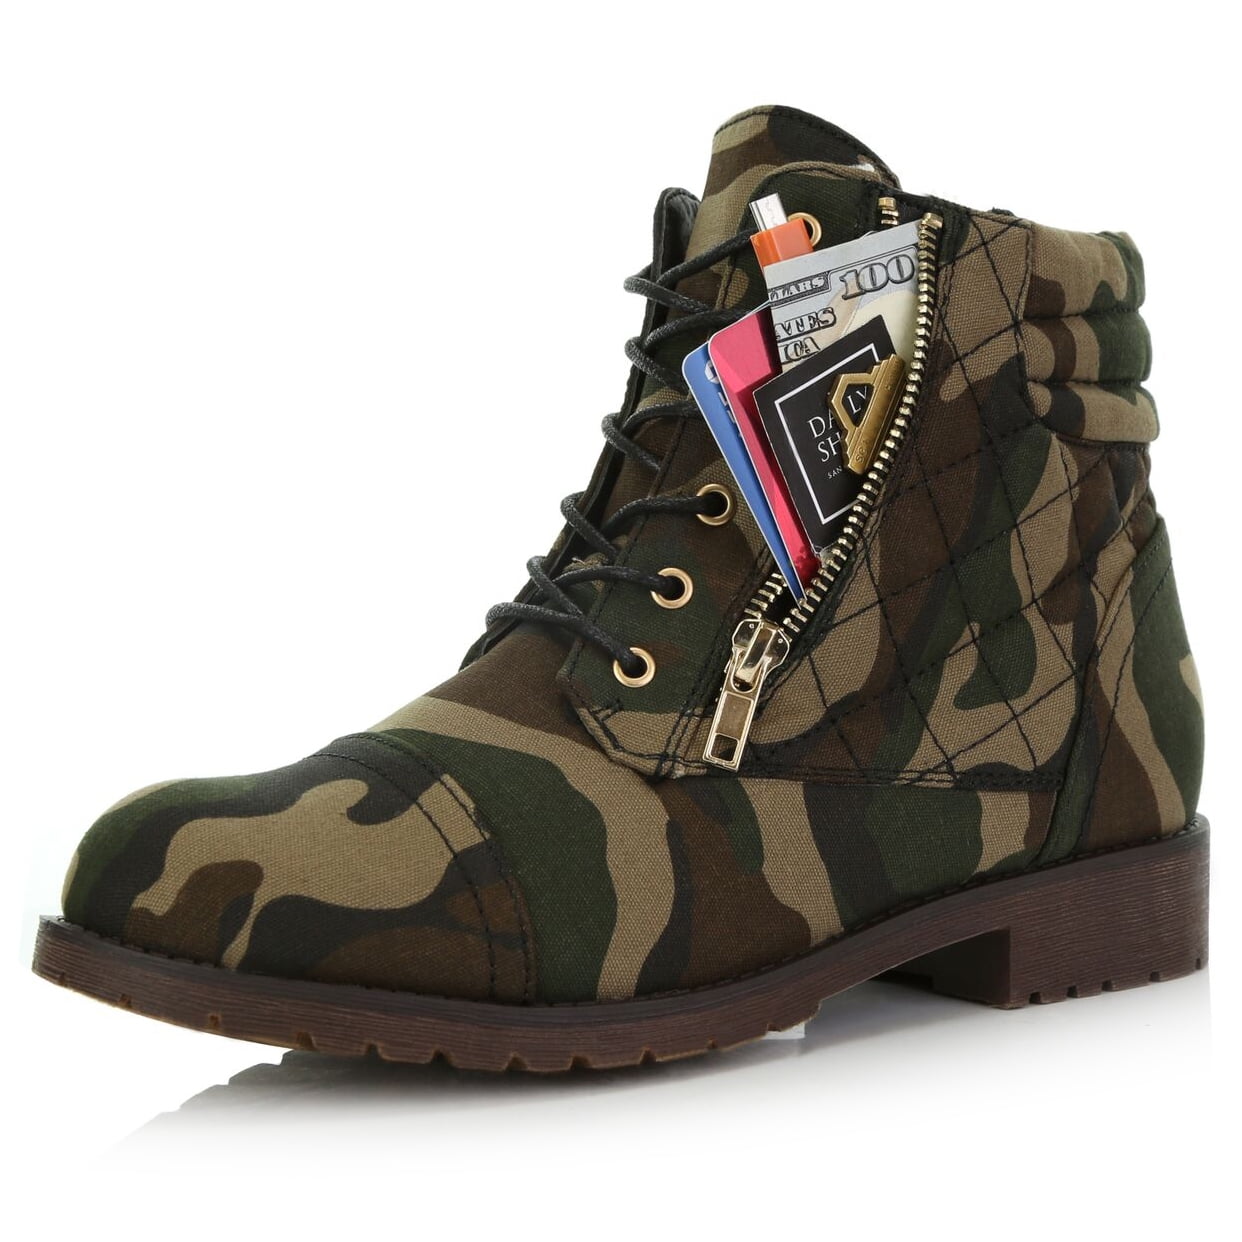 01 Womens Military Fashion Camo High Chunky Heels Punk Ankle Boots Shoes Lace Up